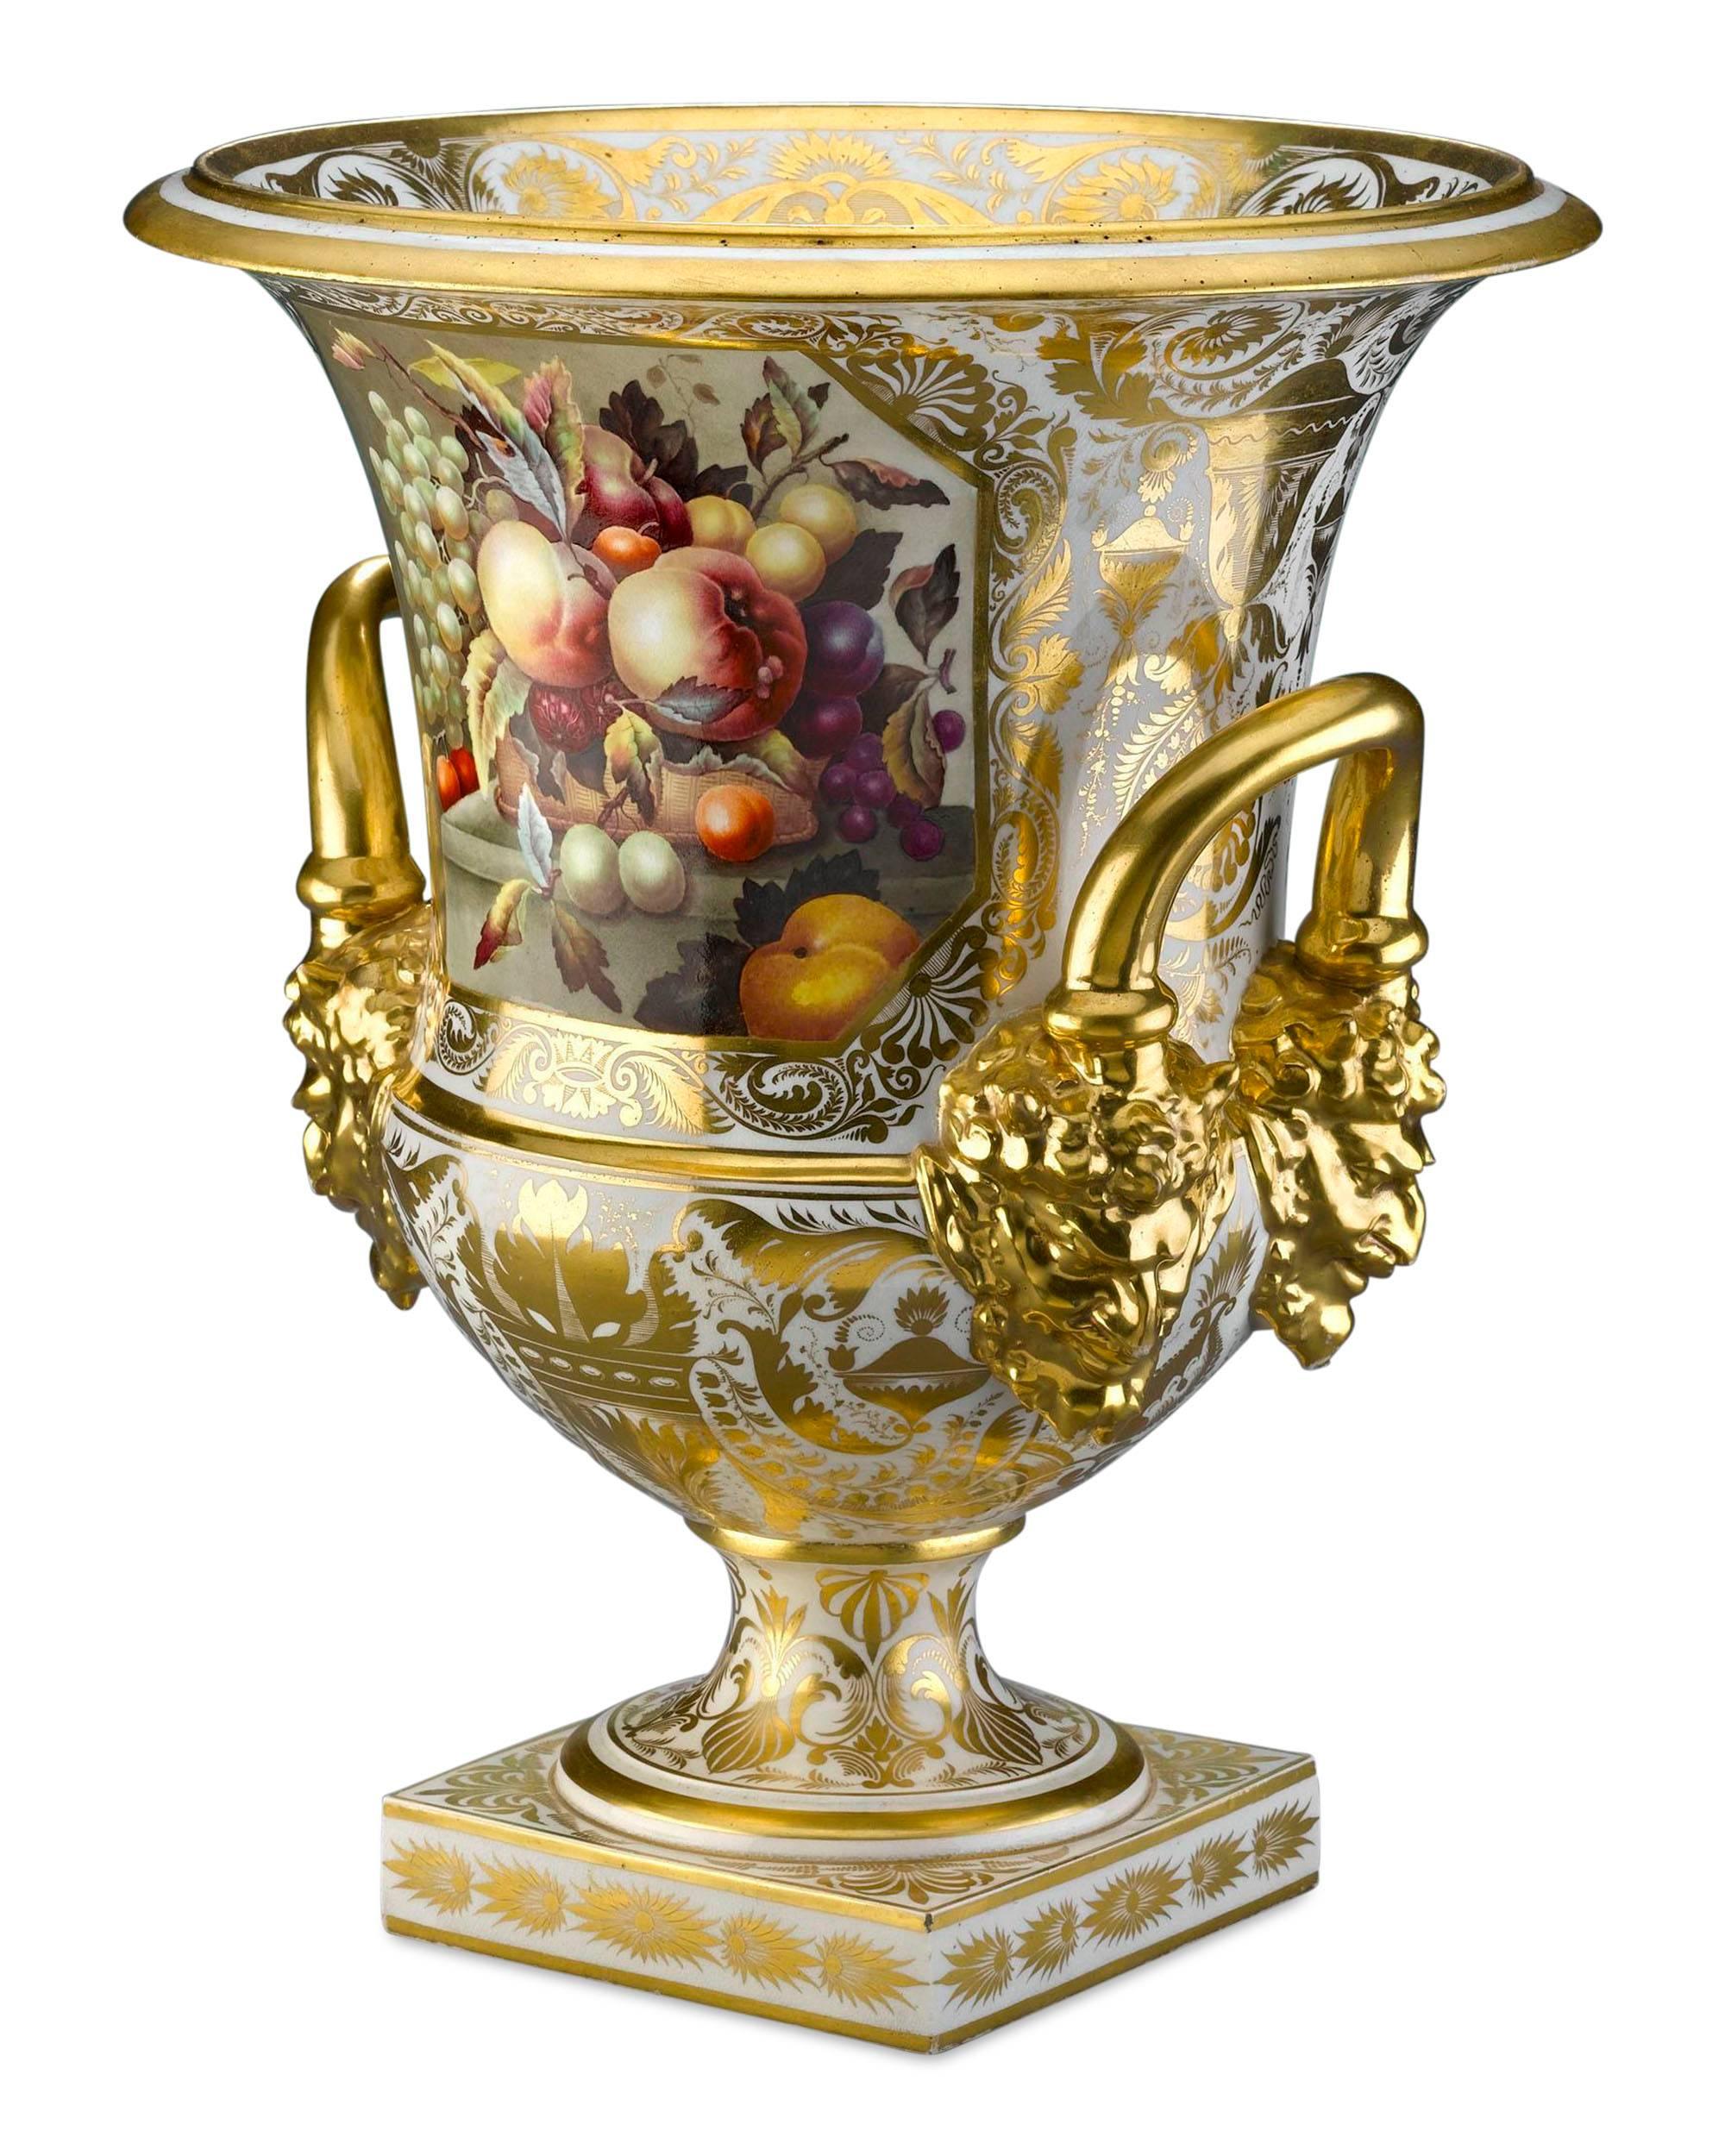 A monumental and stunning Derby Porcelain campana vase beautifully painted by Thomas Steel, one of the most significant and talented Derby artists. Gilded satyr mask handles and elegantly painted fruits and decoration designate this wonderful vase